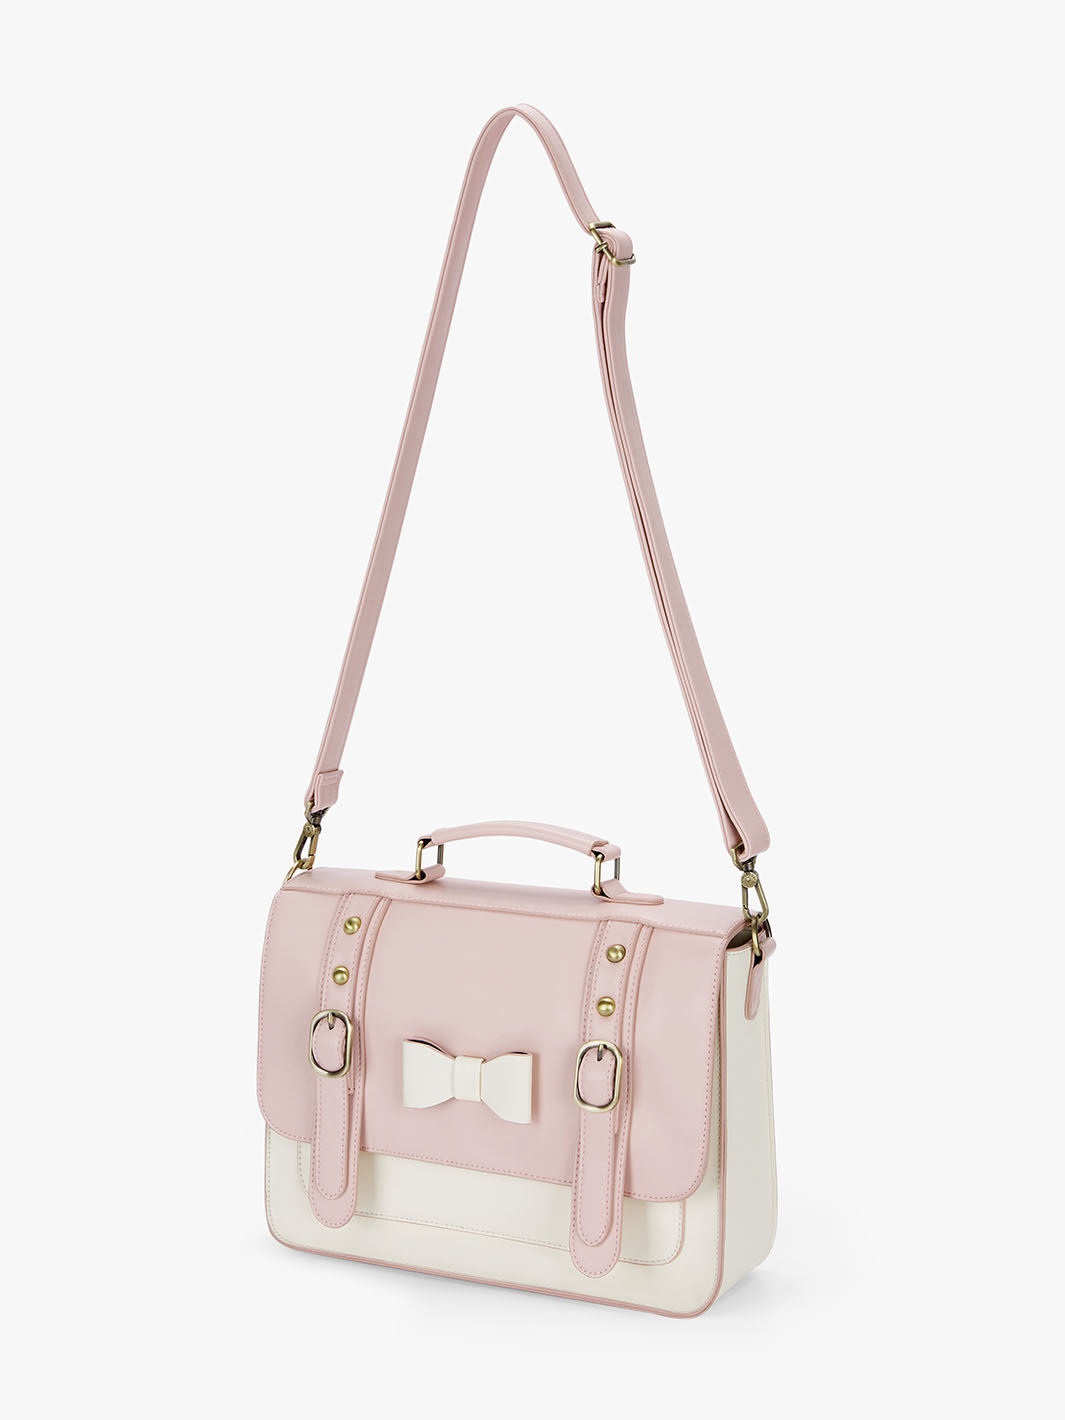 Women's Faux Leather Bow Messenger Bags - Pink/Beige